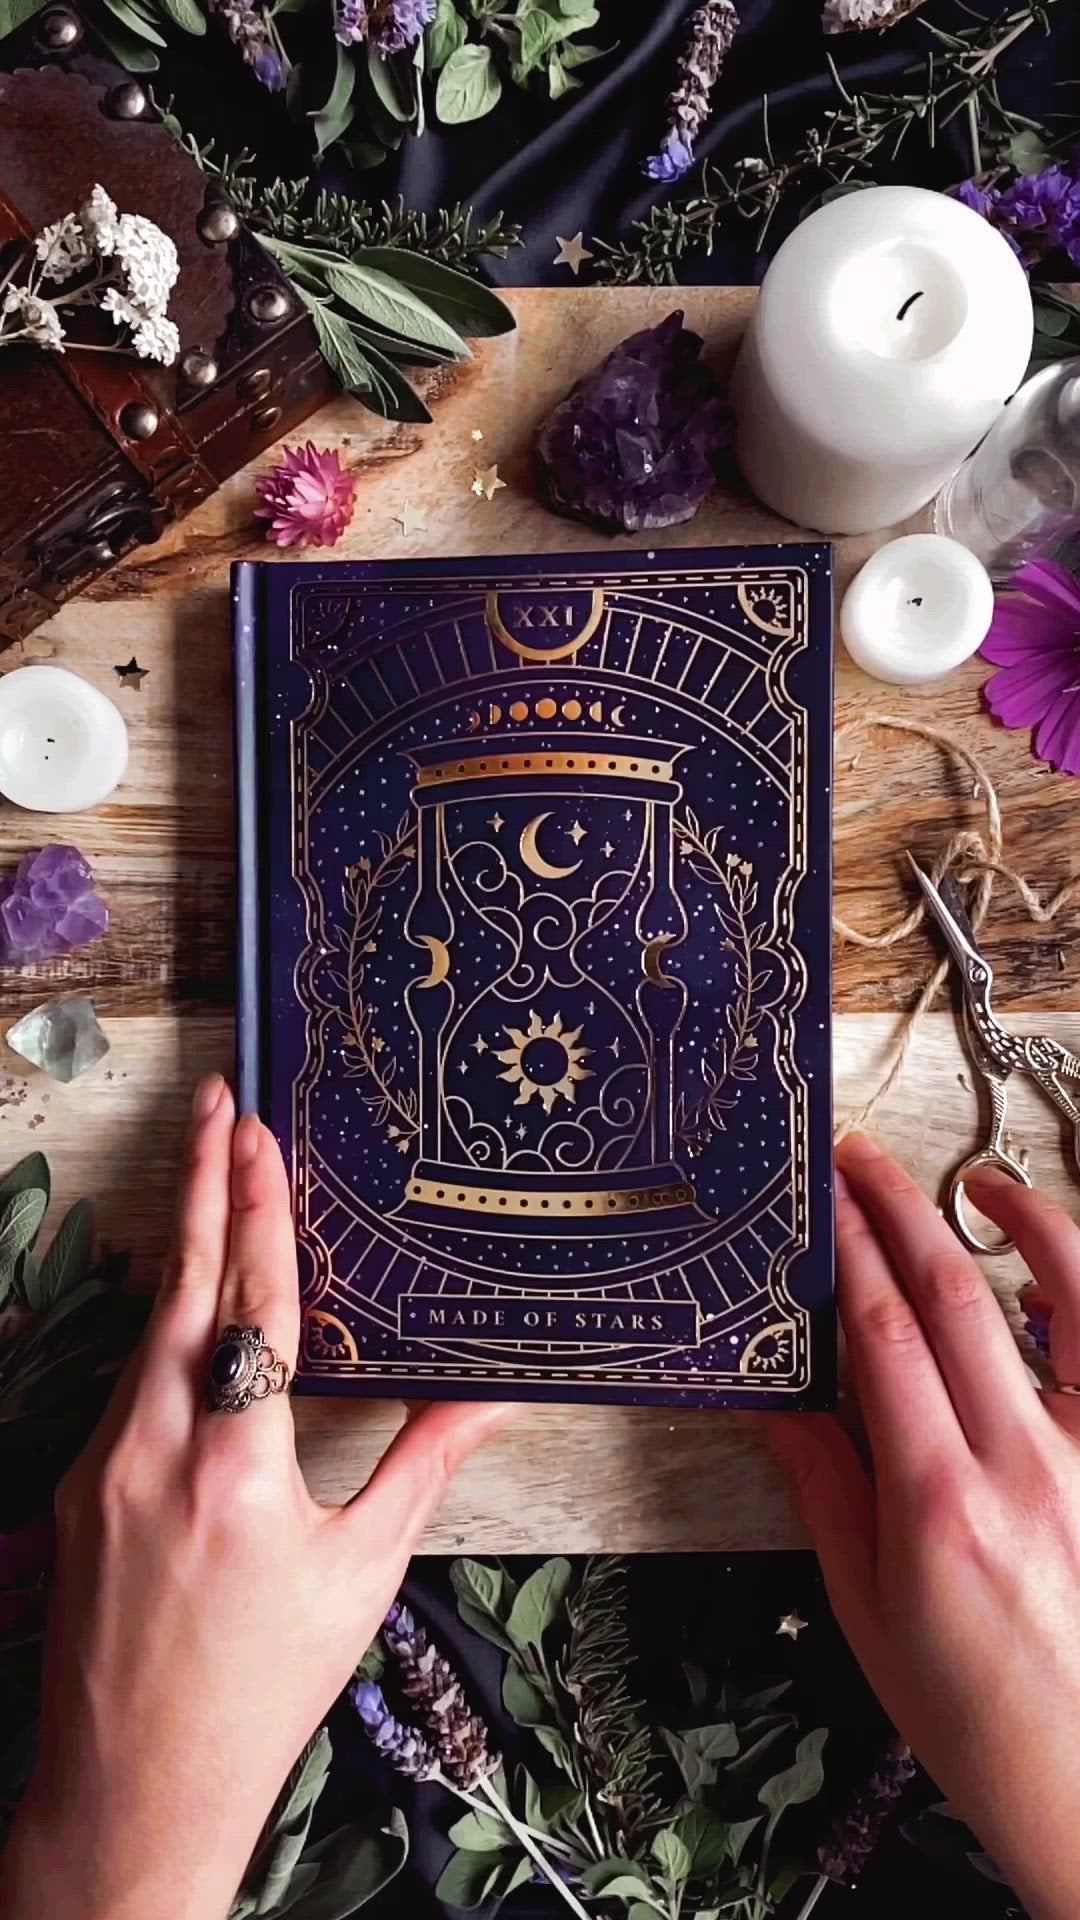 Made of Stars Journal Notebook. Blank dotted dot grid lined Journal. Purple starry covers with gold foiling. Hourglass design with sun and moon and stars. Journaling Bujo notebook. 180pages. Fountain pen friendly. The Quirky Cup Collective